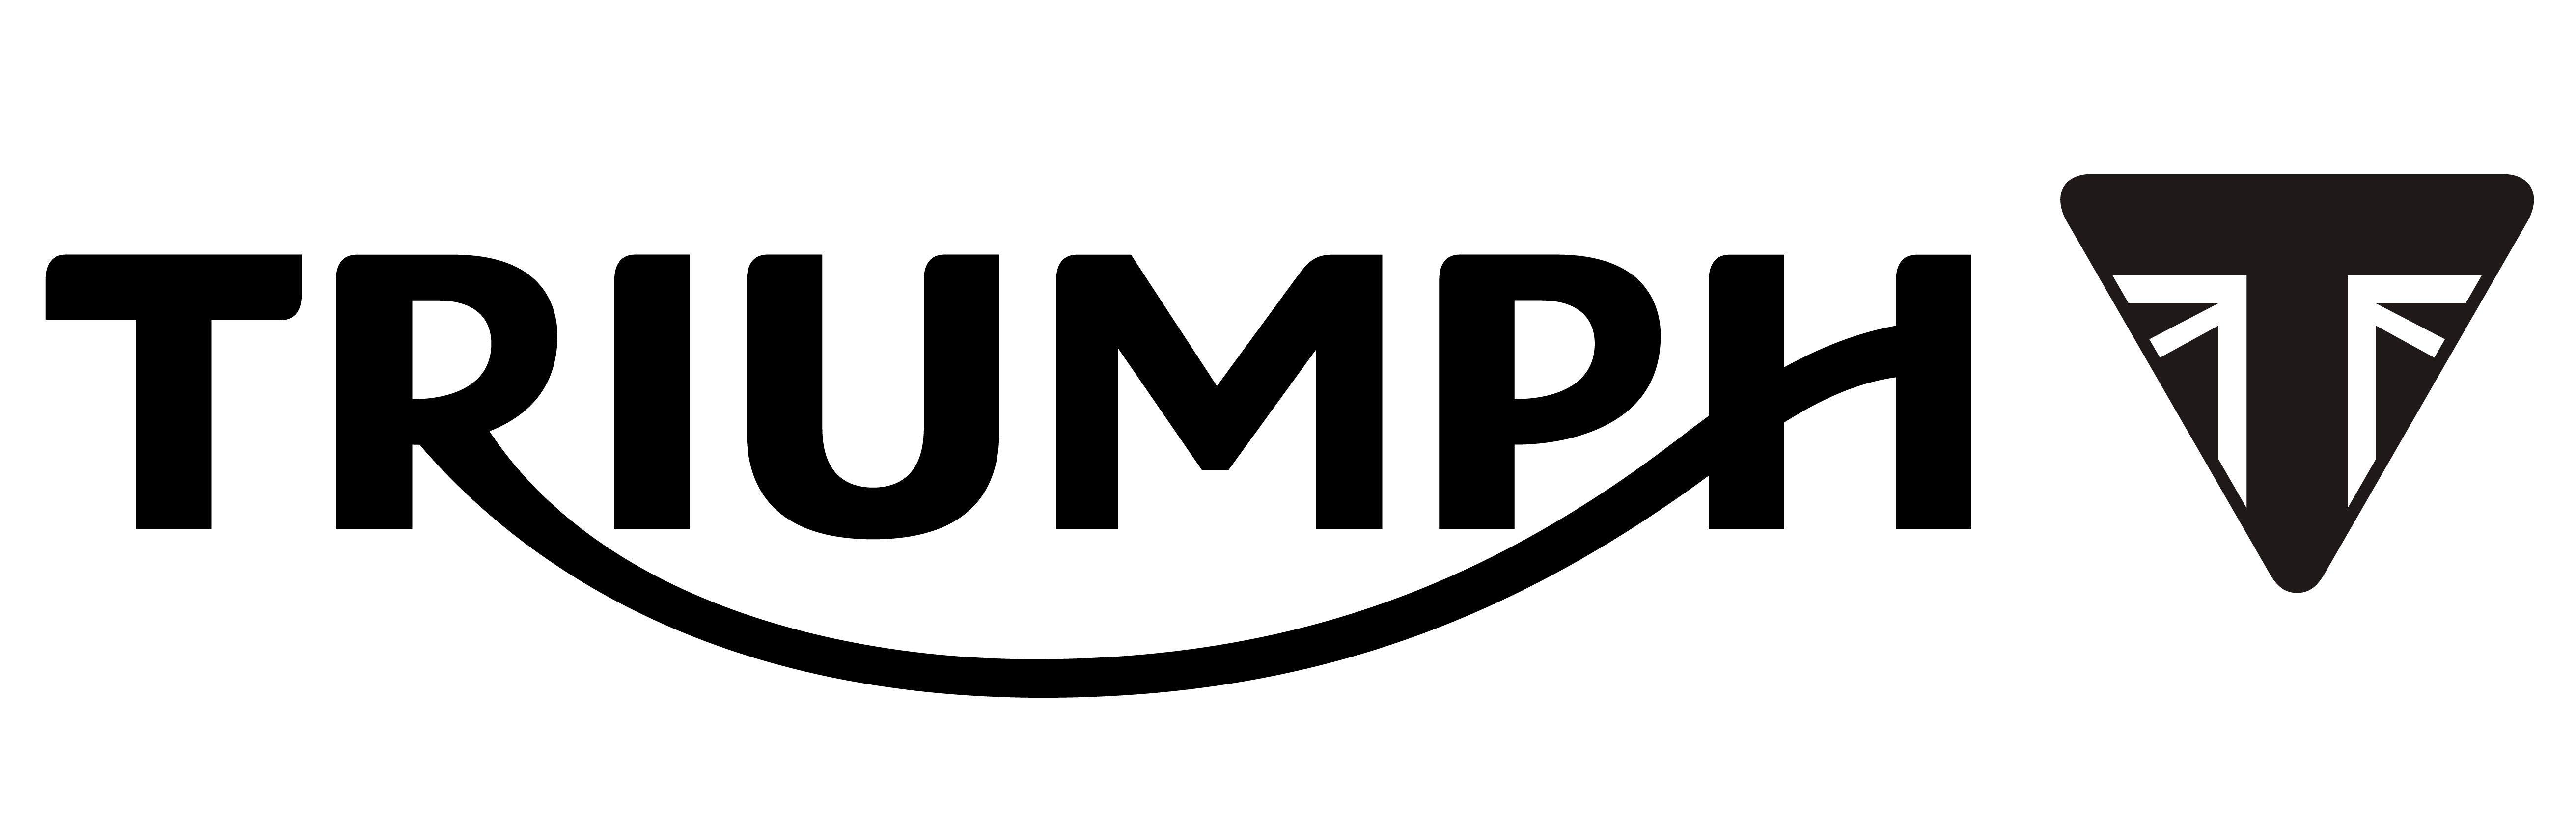 Triumph Motorcycle Logo - Triumph Motorcycles Offers: Free Accessories & More